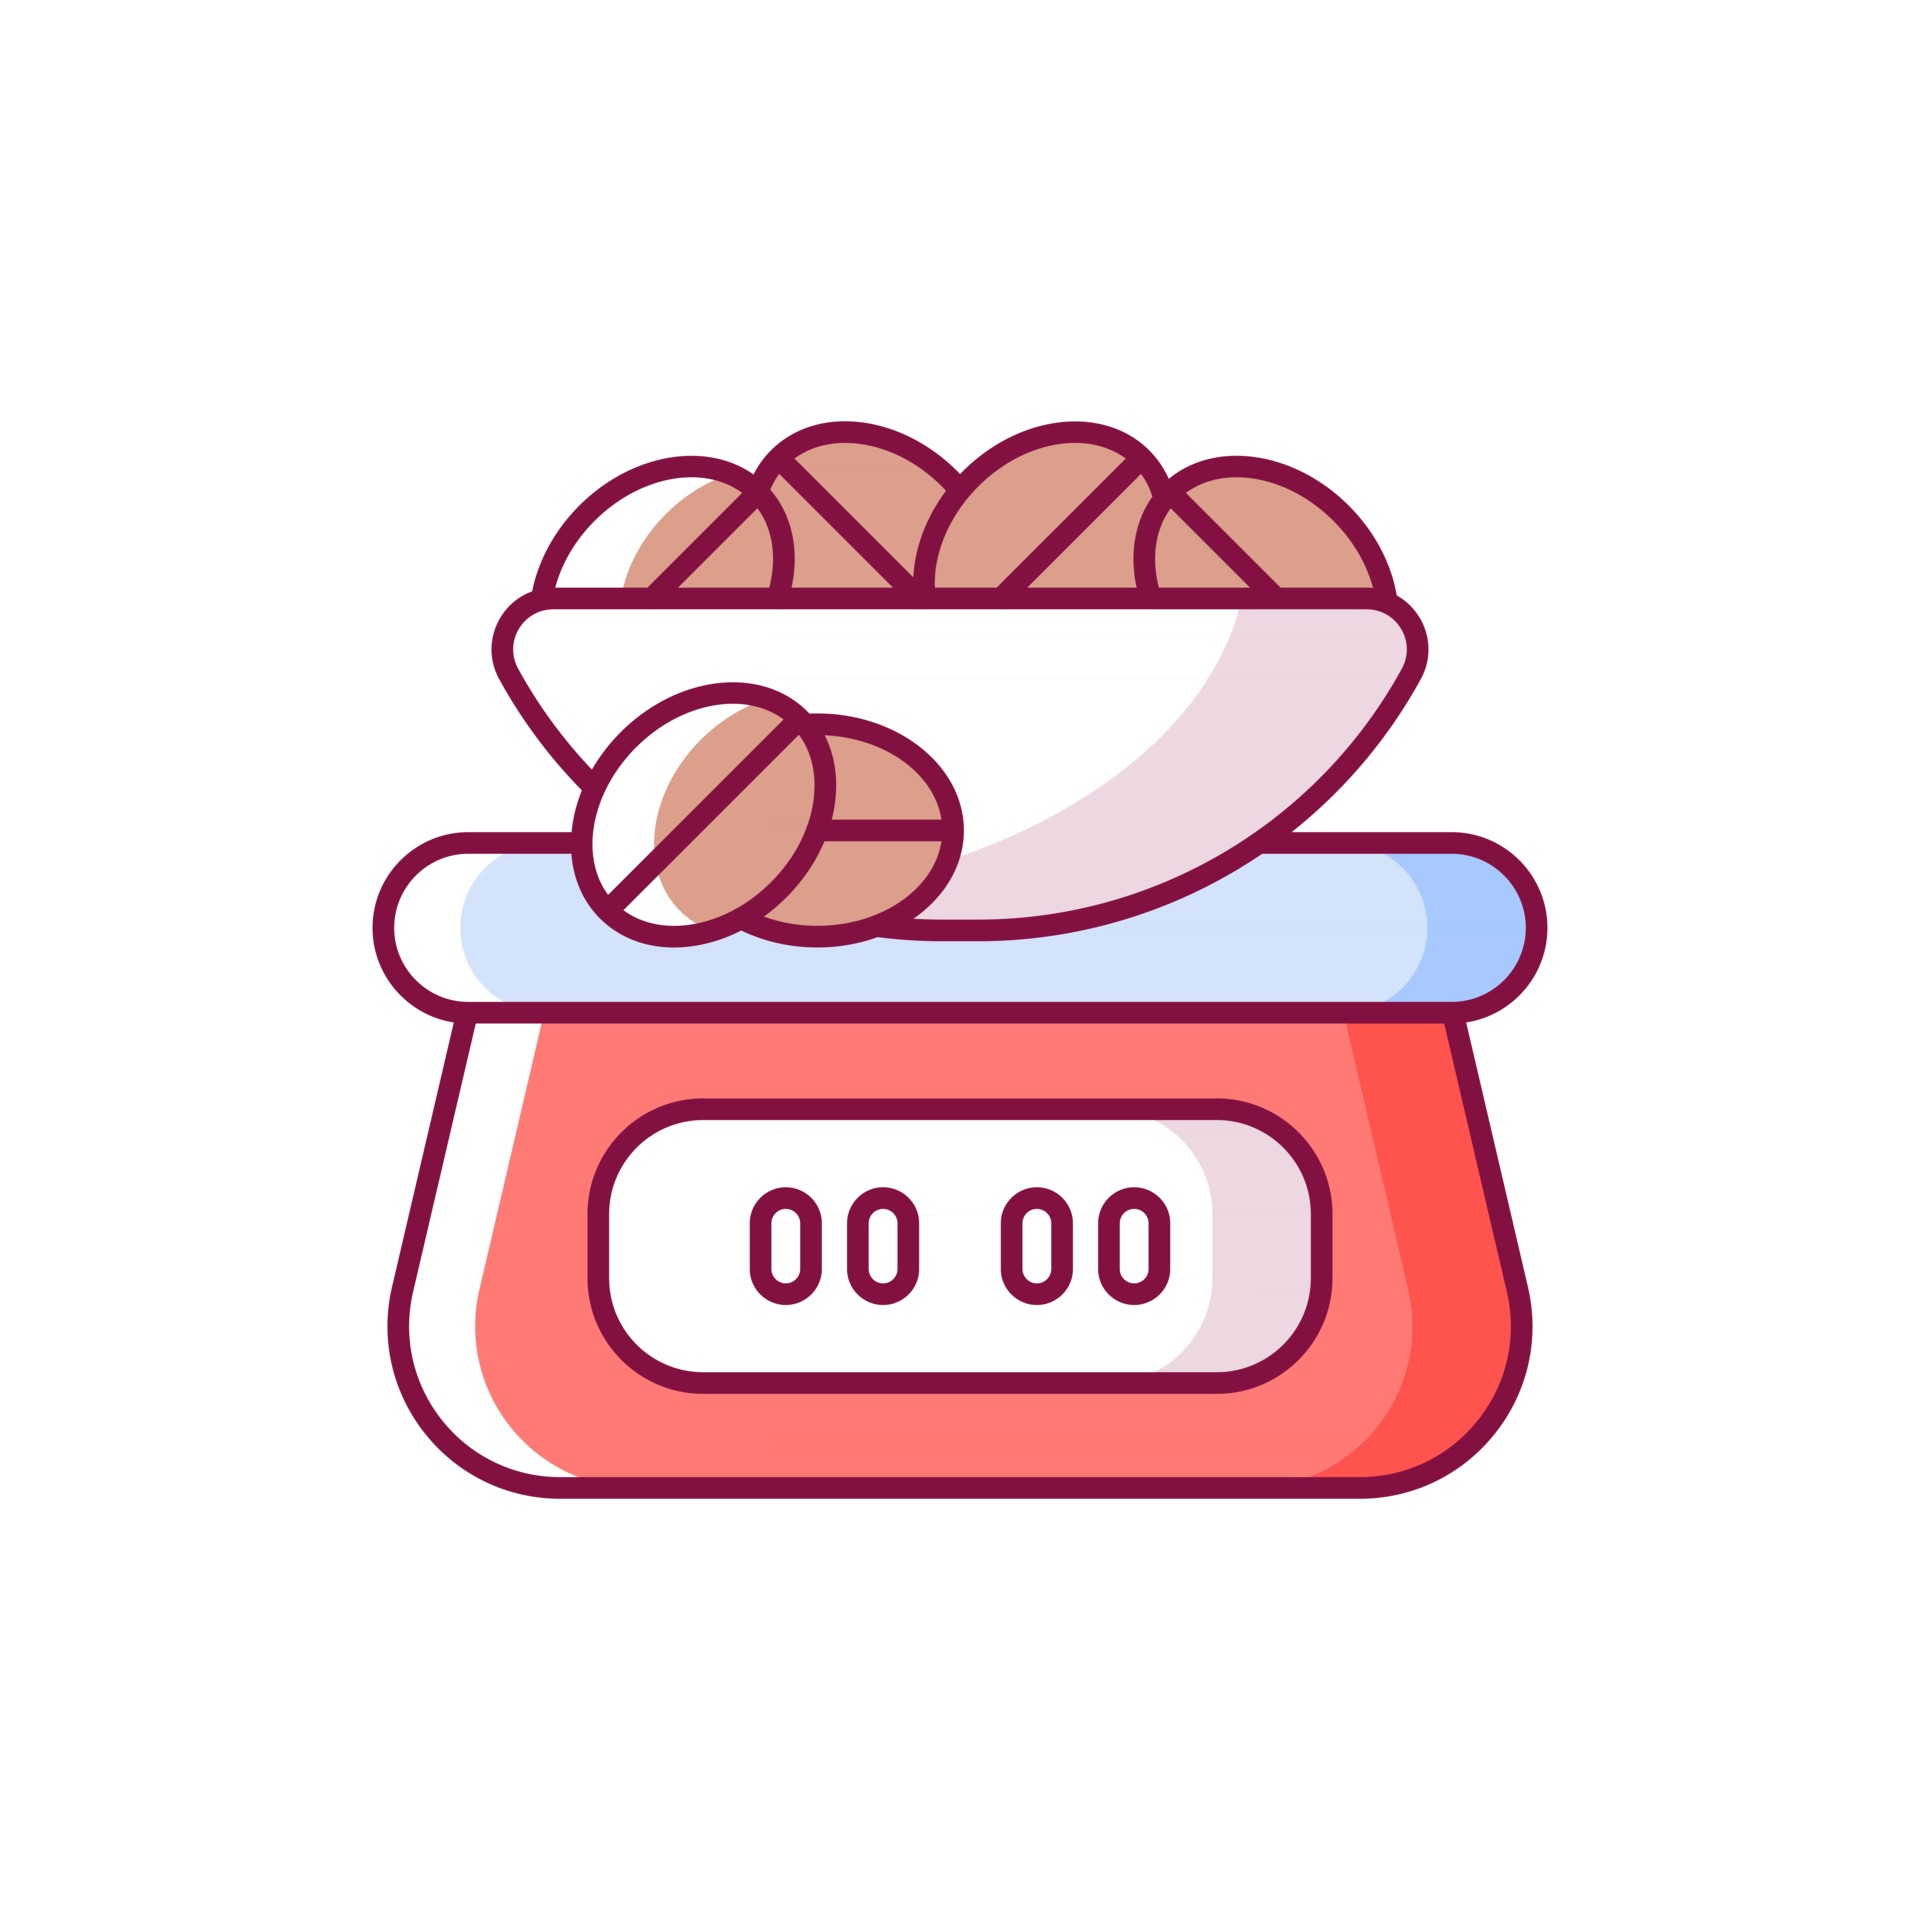 https://static.vecteezy.com/system/resources/previews/002/931/891/original/coffee-scale-rgb-color-icon-appliance-for-measuring-beans-weight-weighing-roasted-seeds-for-espresso-preparation-isolated-illustration-barista-accessories-simple-filled-line-drawing-vector.jpg